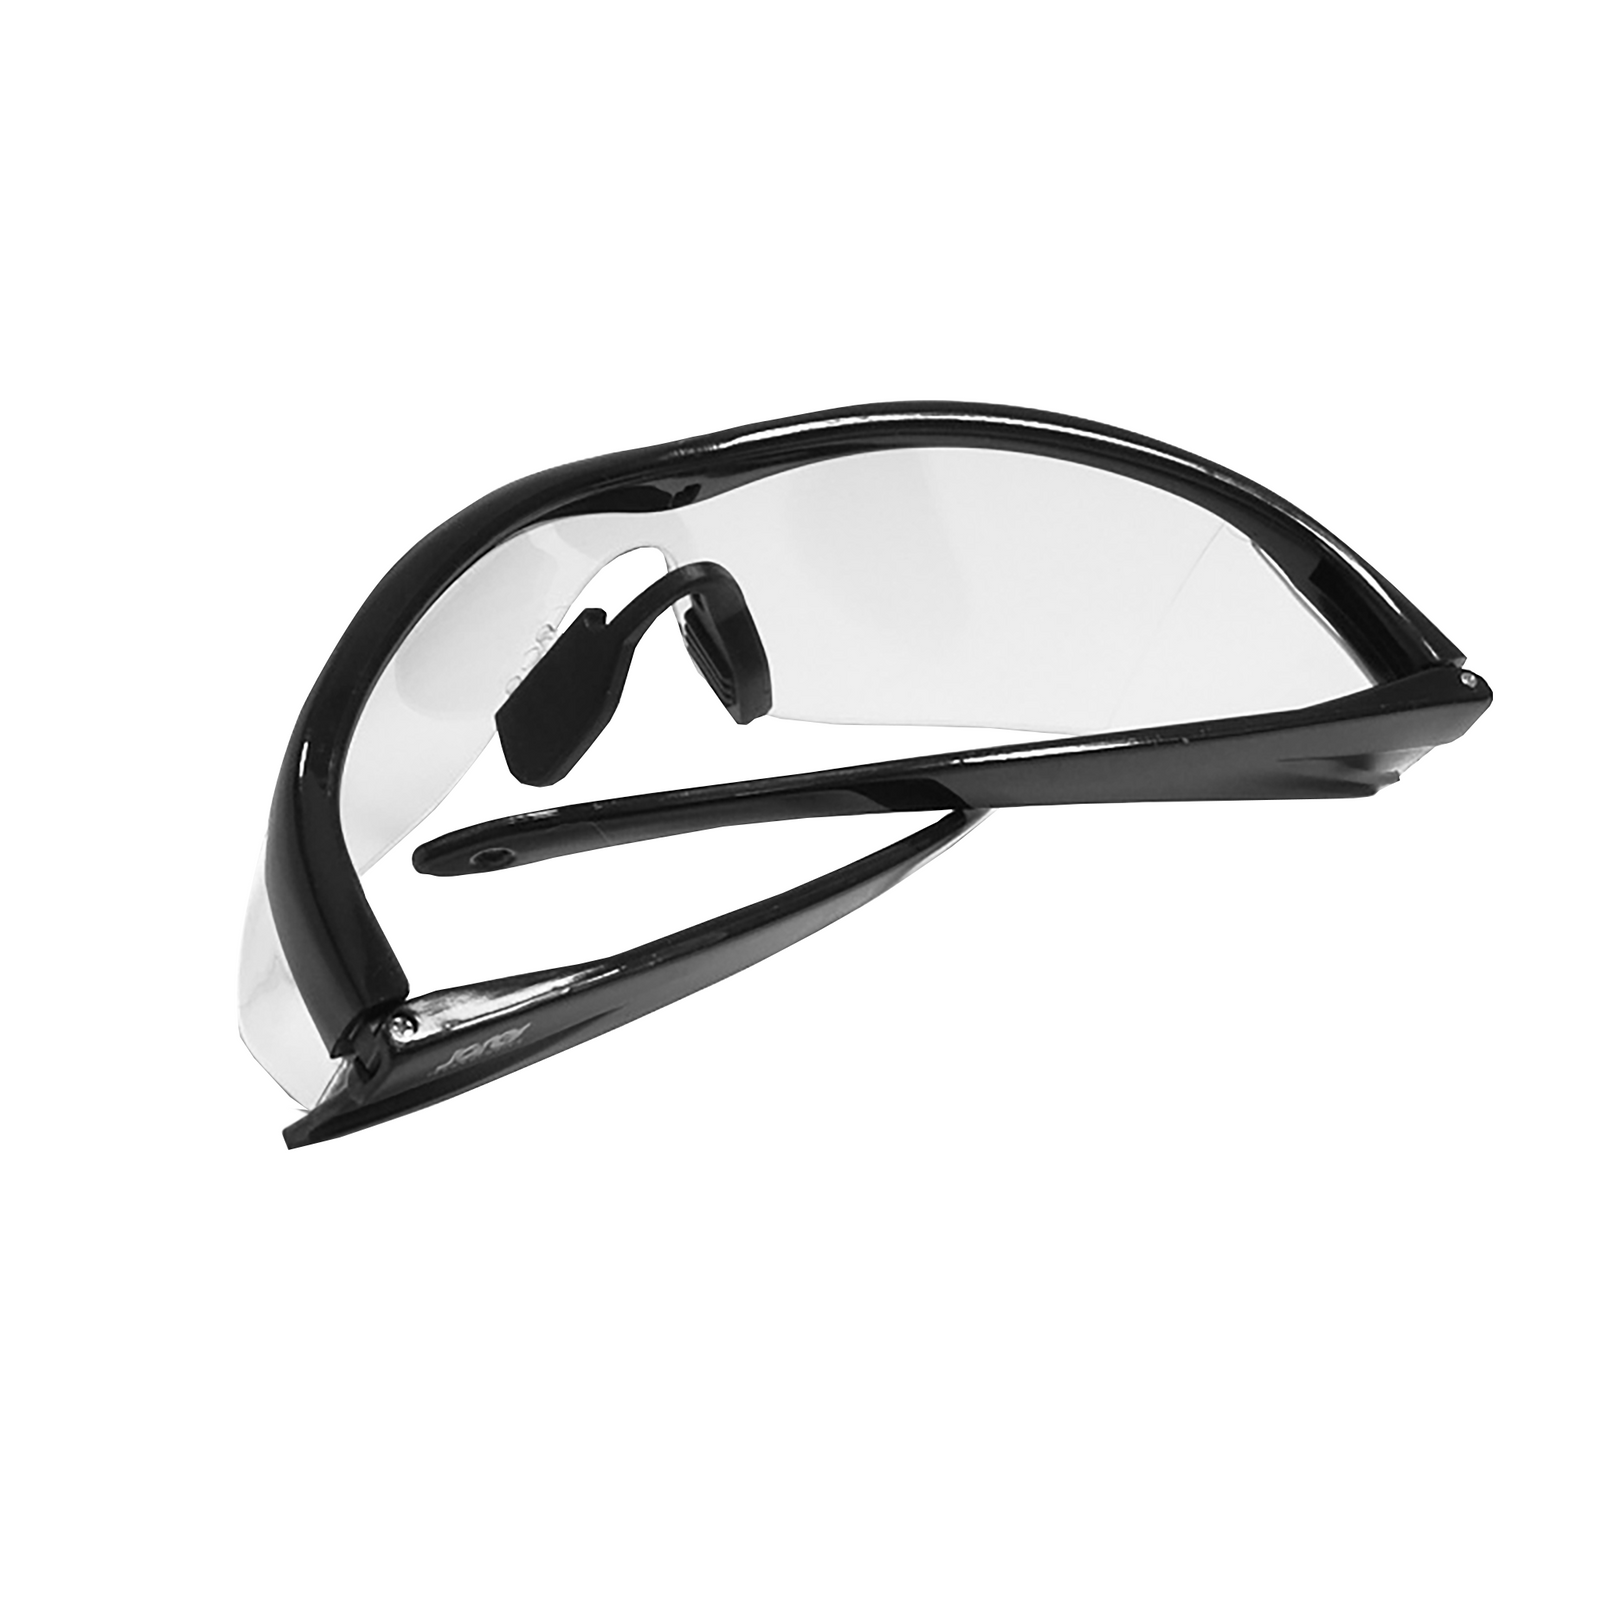 Back view of a modern design framed JORESTECH polycarbonate safety clear glasses with side shields for high impact protection with the temples folded